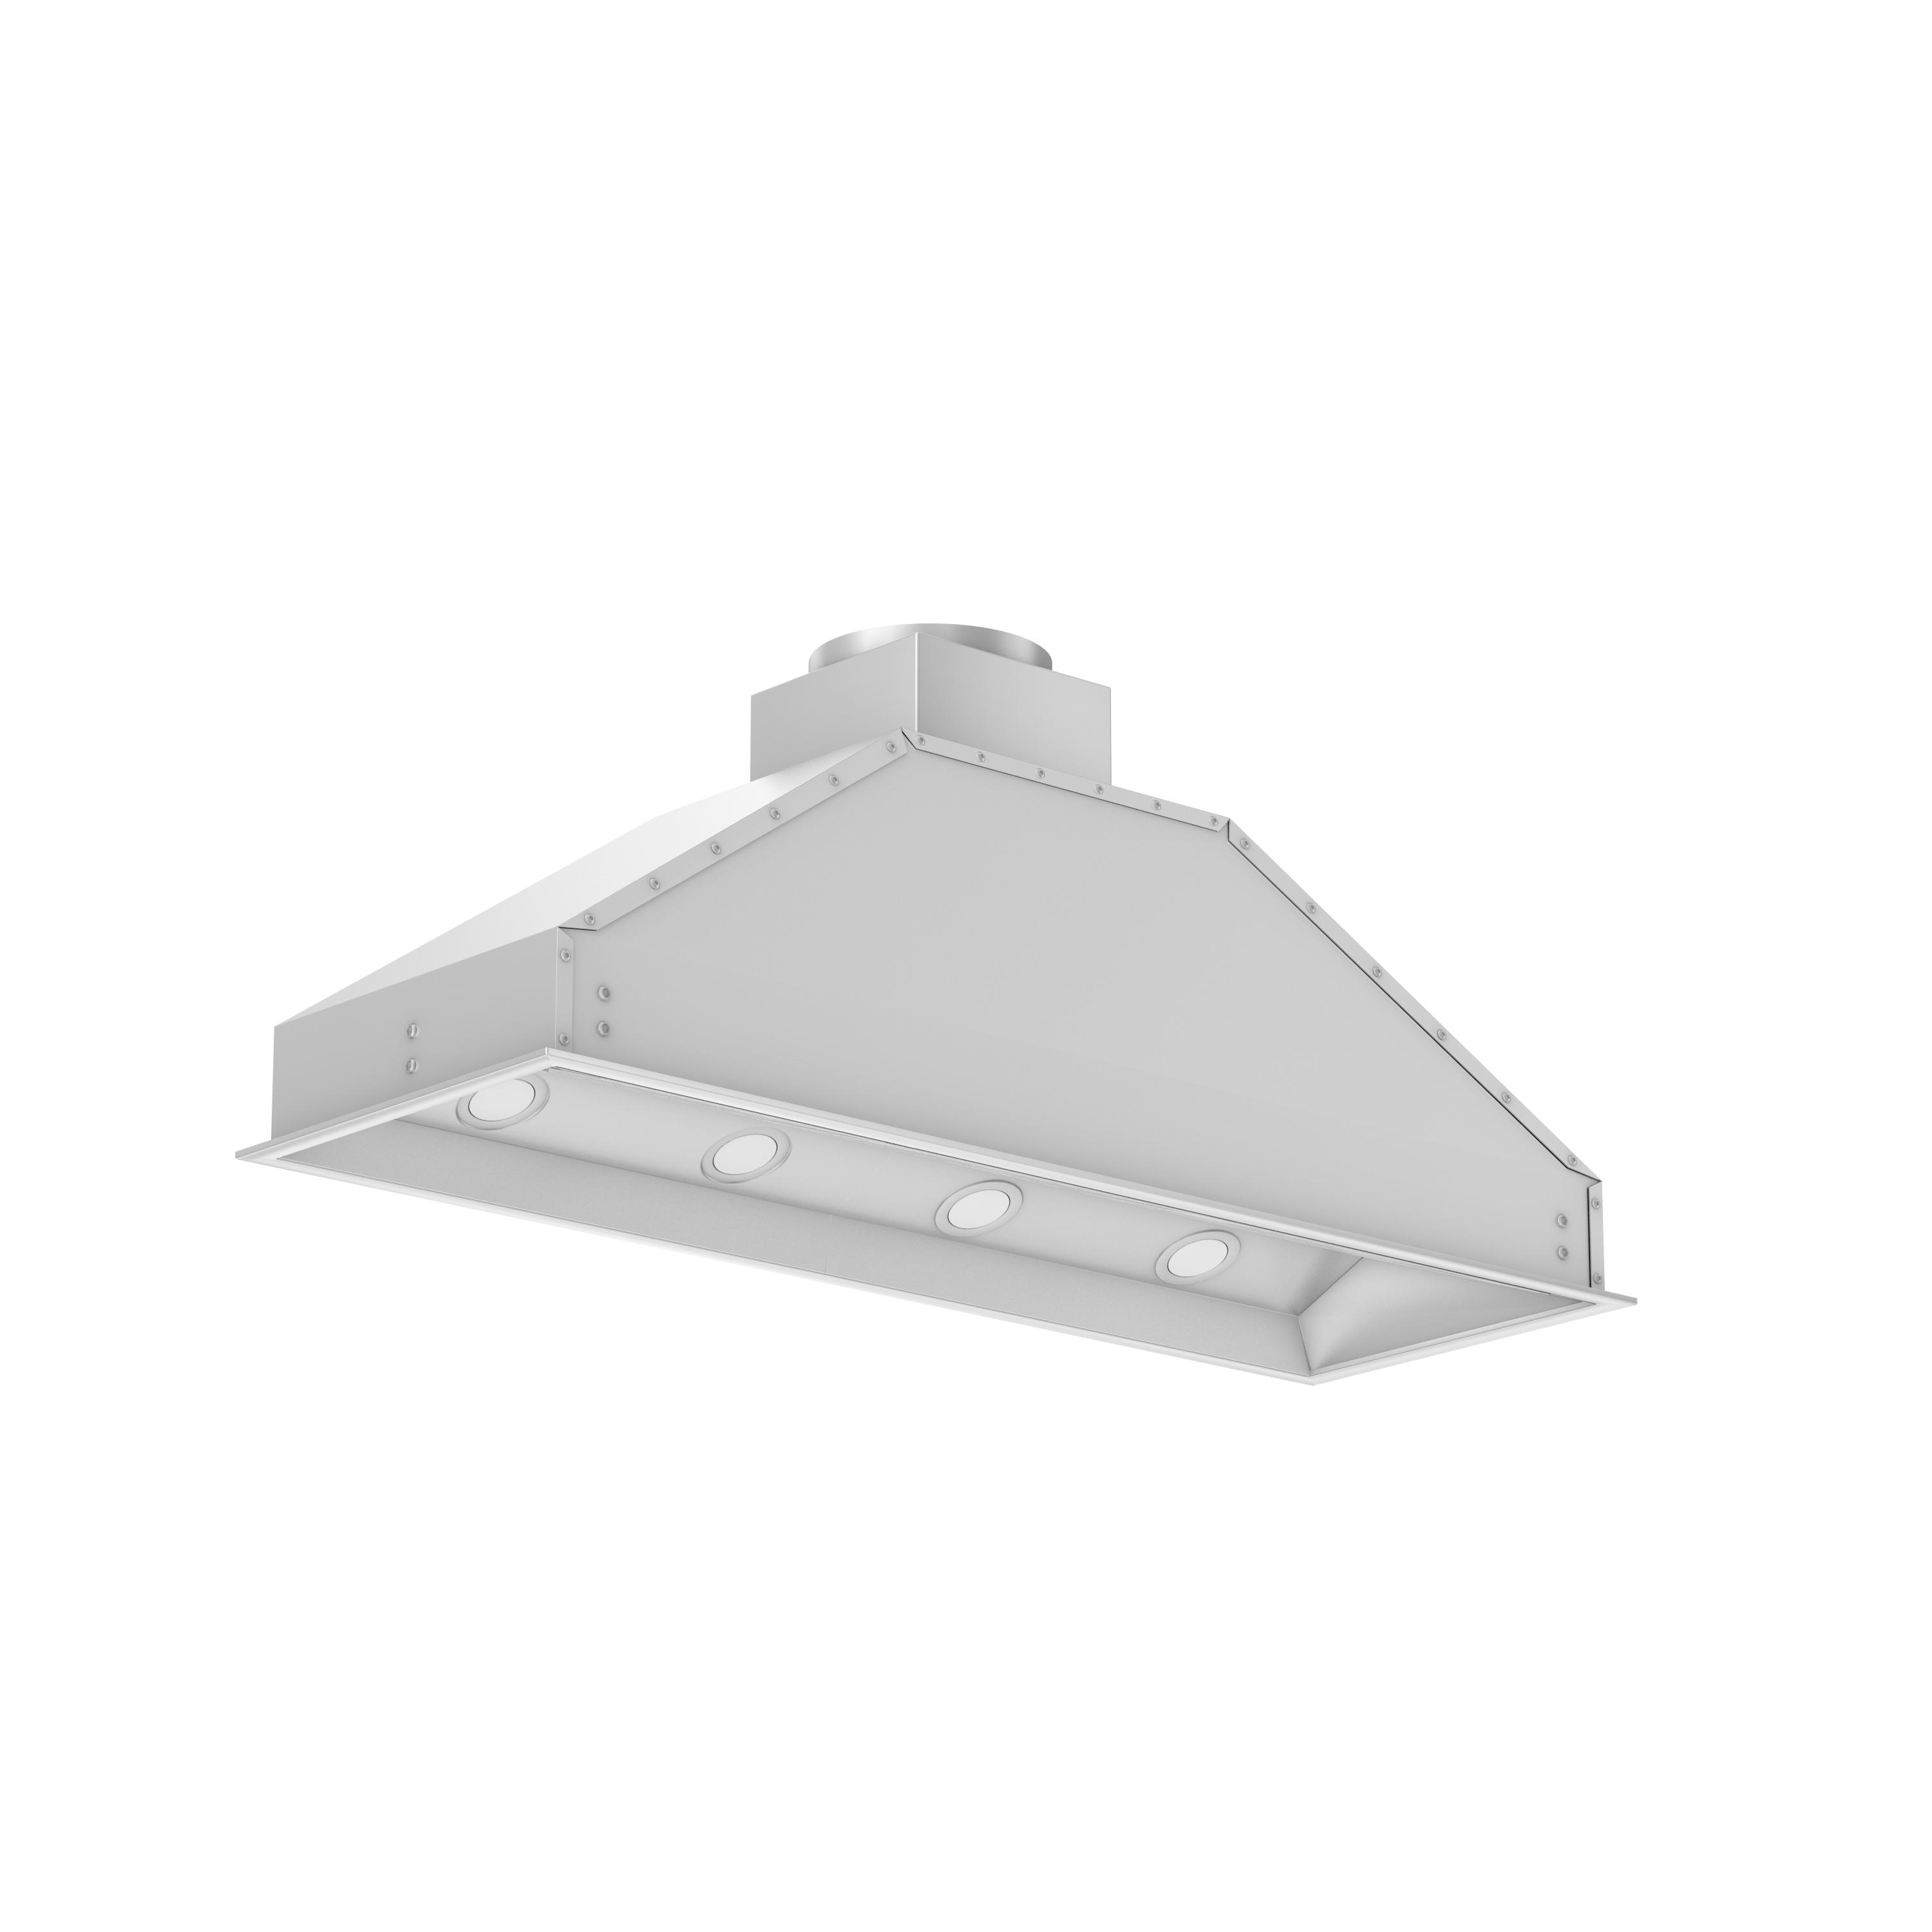 ZLINE 46" Ducted Wall Mount Range Hood Insert in Outdoor Approved Stainless Steel (695-304-46)